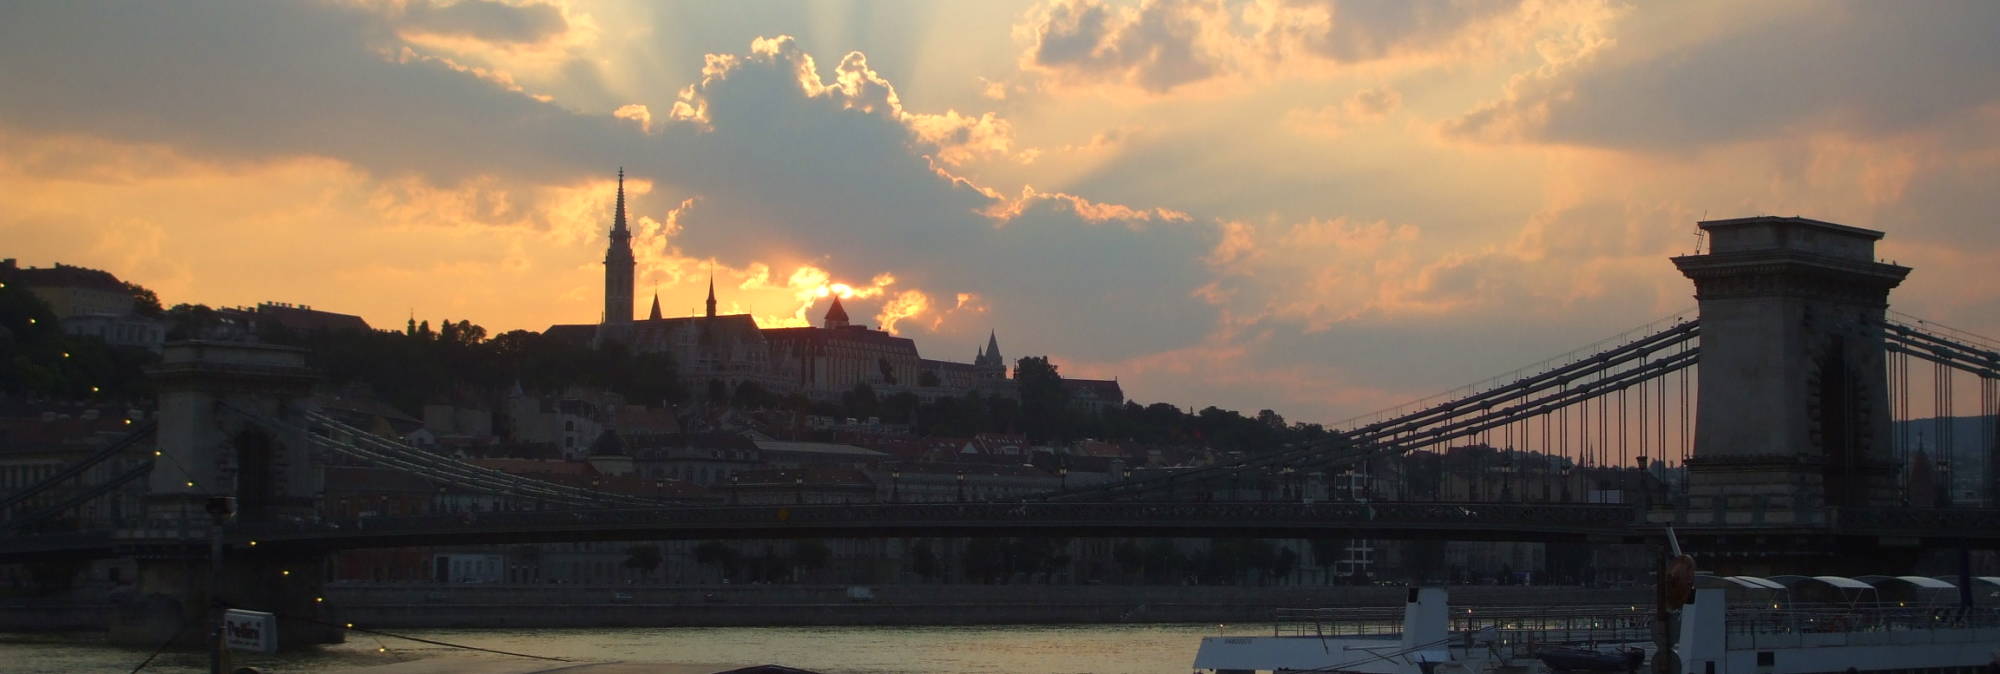 Castle Hill and the Chain Bridge in Budapest, Hungary.